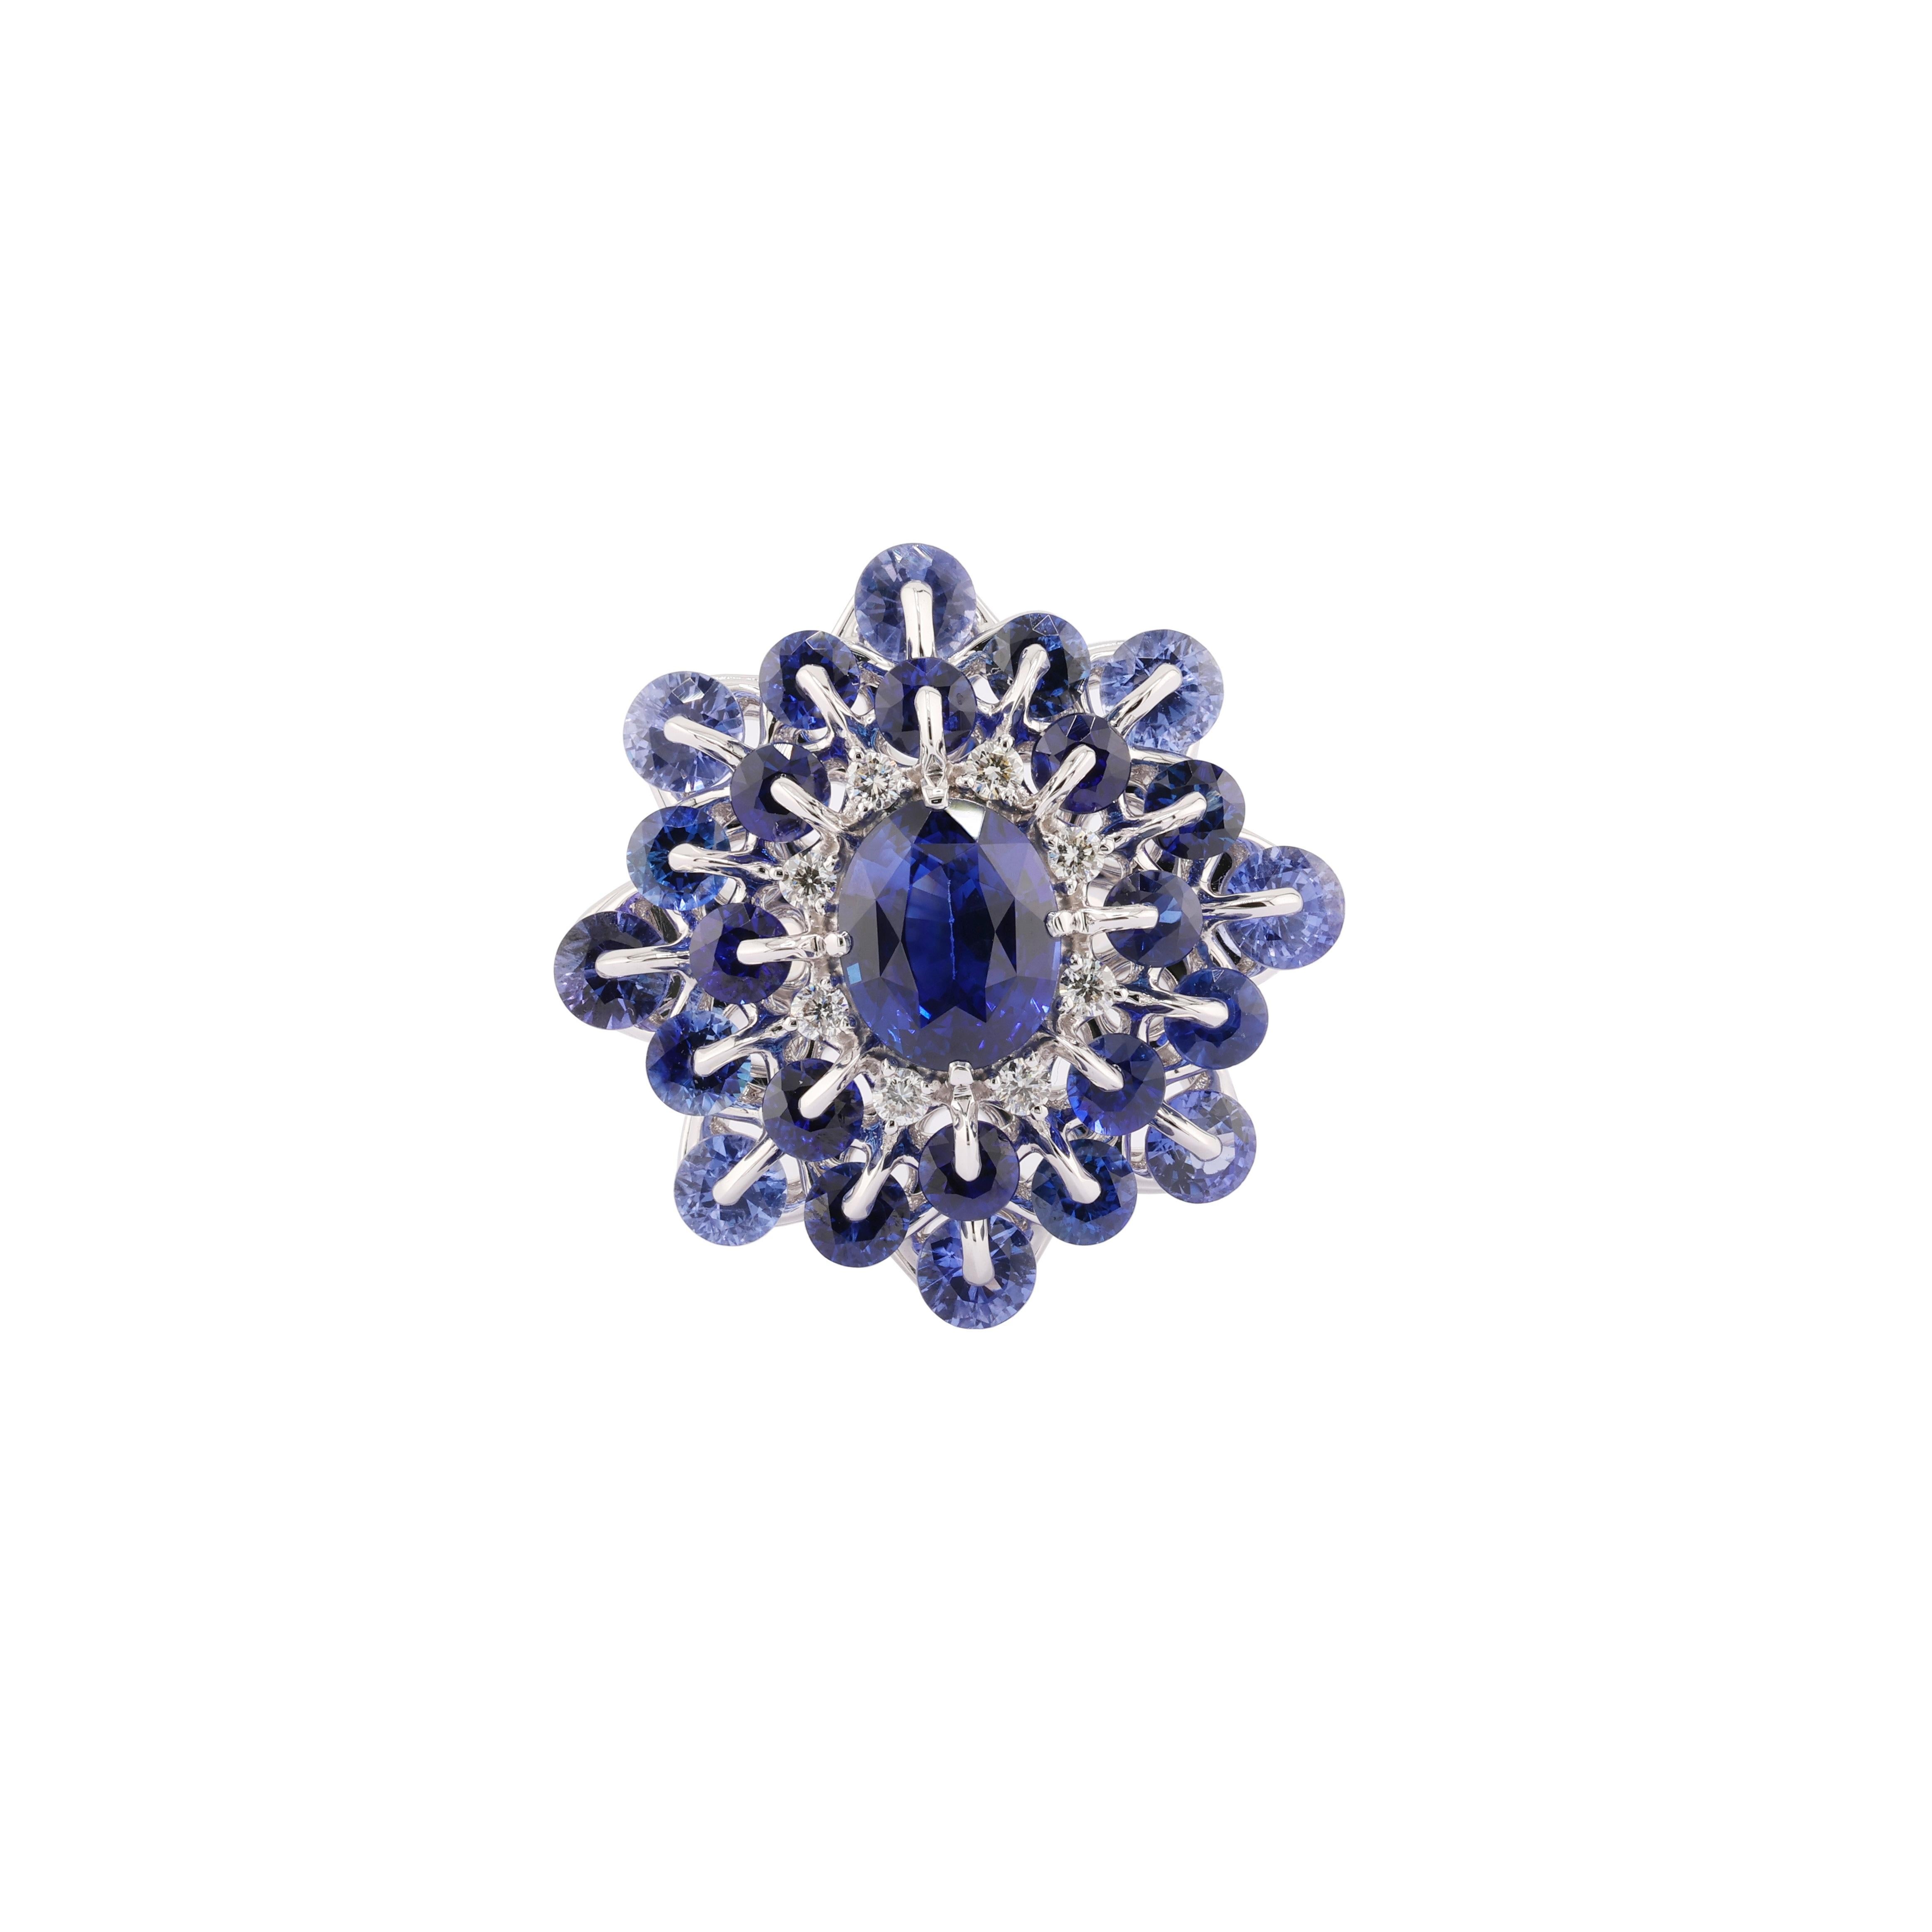 MOISEIKIN's mesmerising sapphire ring with total 4.89ct Blue sapphire, decorated with diamonds and matching blue sapphires, captures the eye and radiates elegance and sophistication.
Inspired by the gorgeous evening Ball dress, the ring is